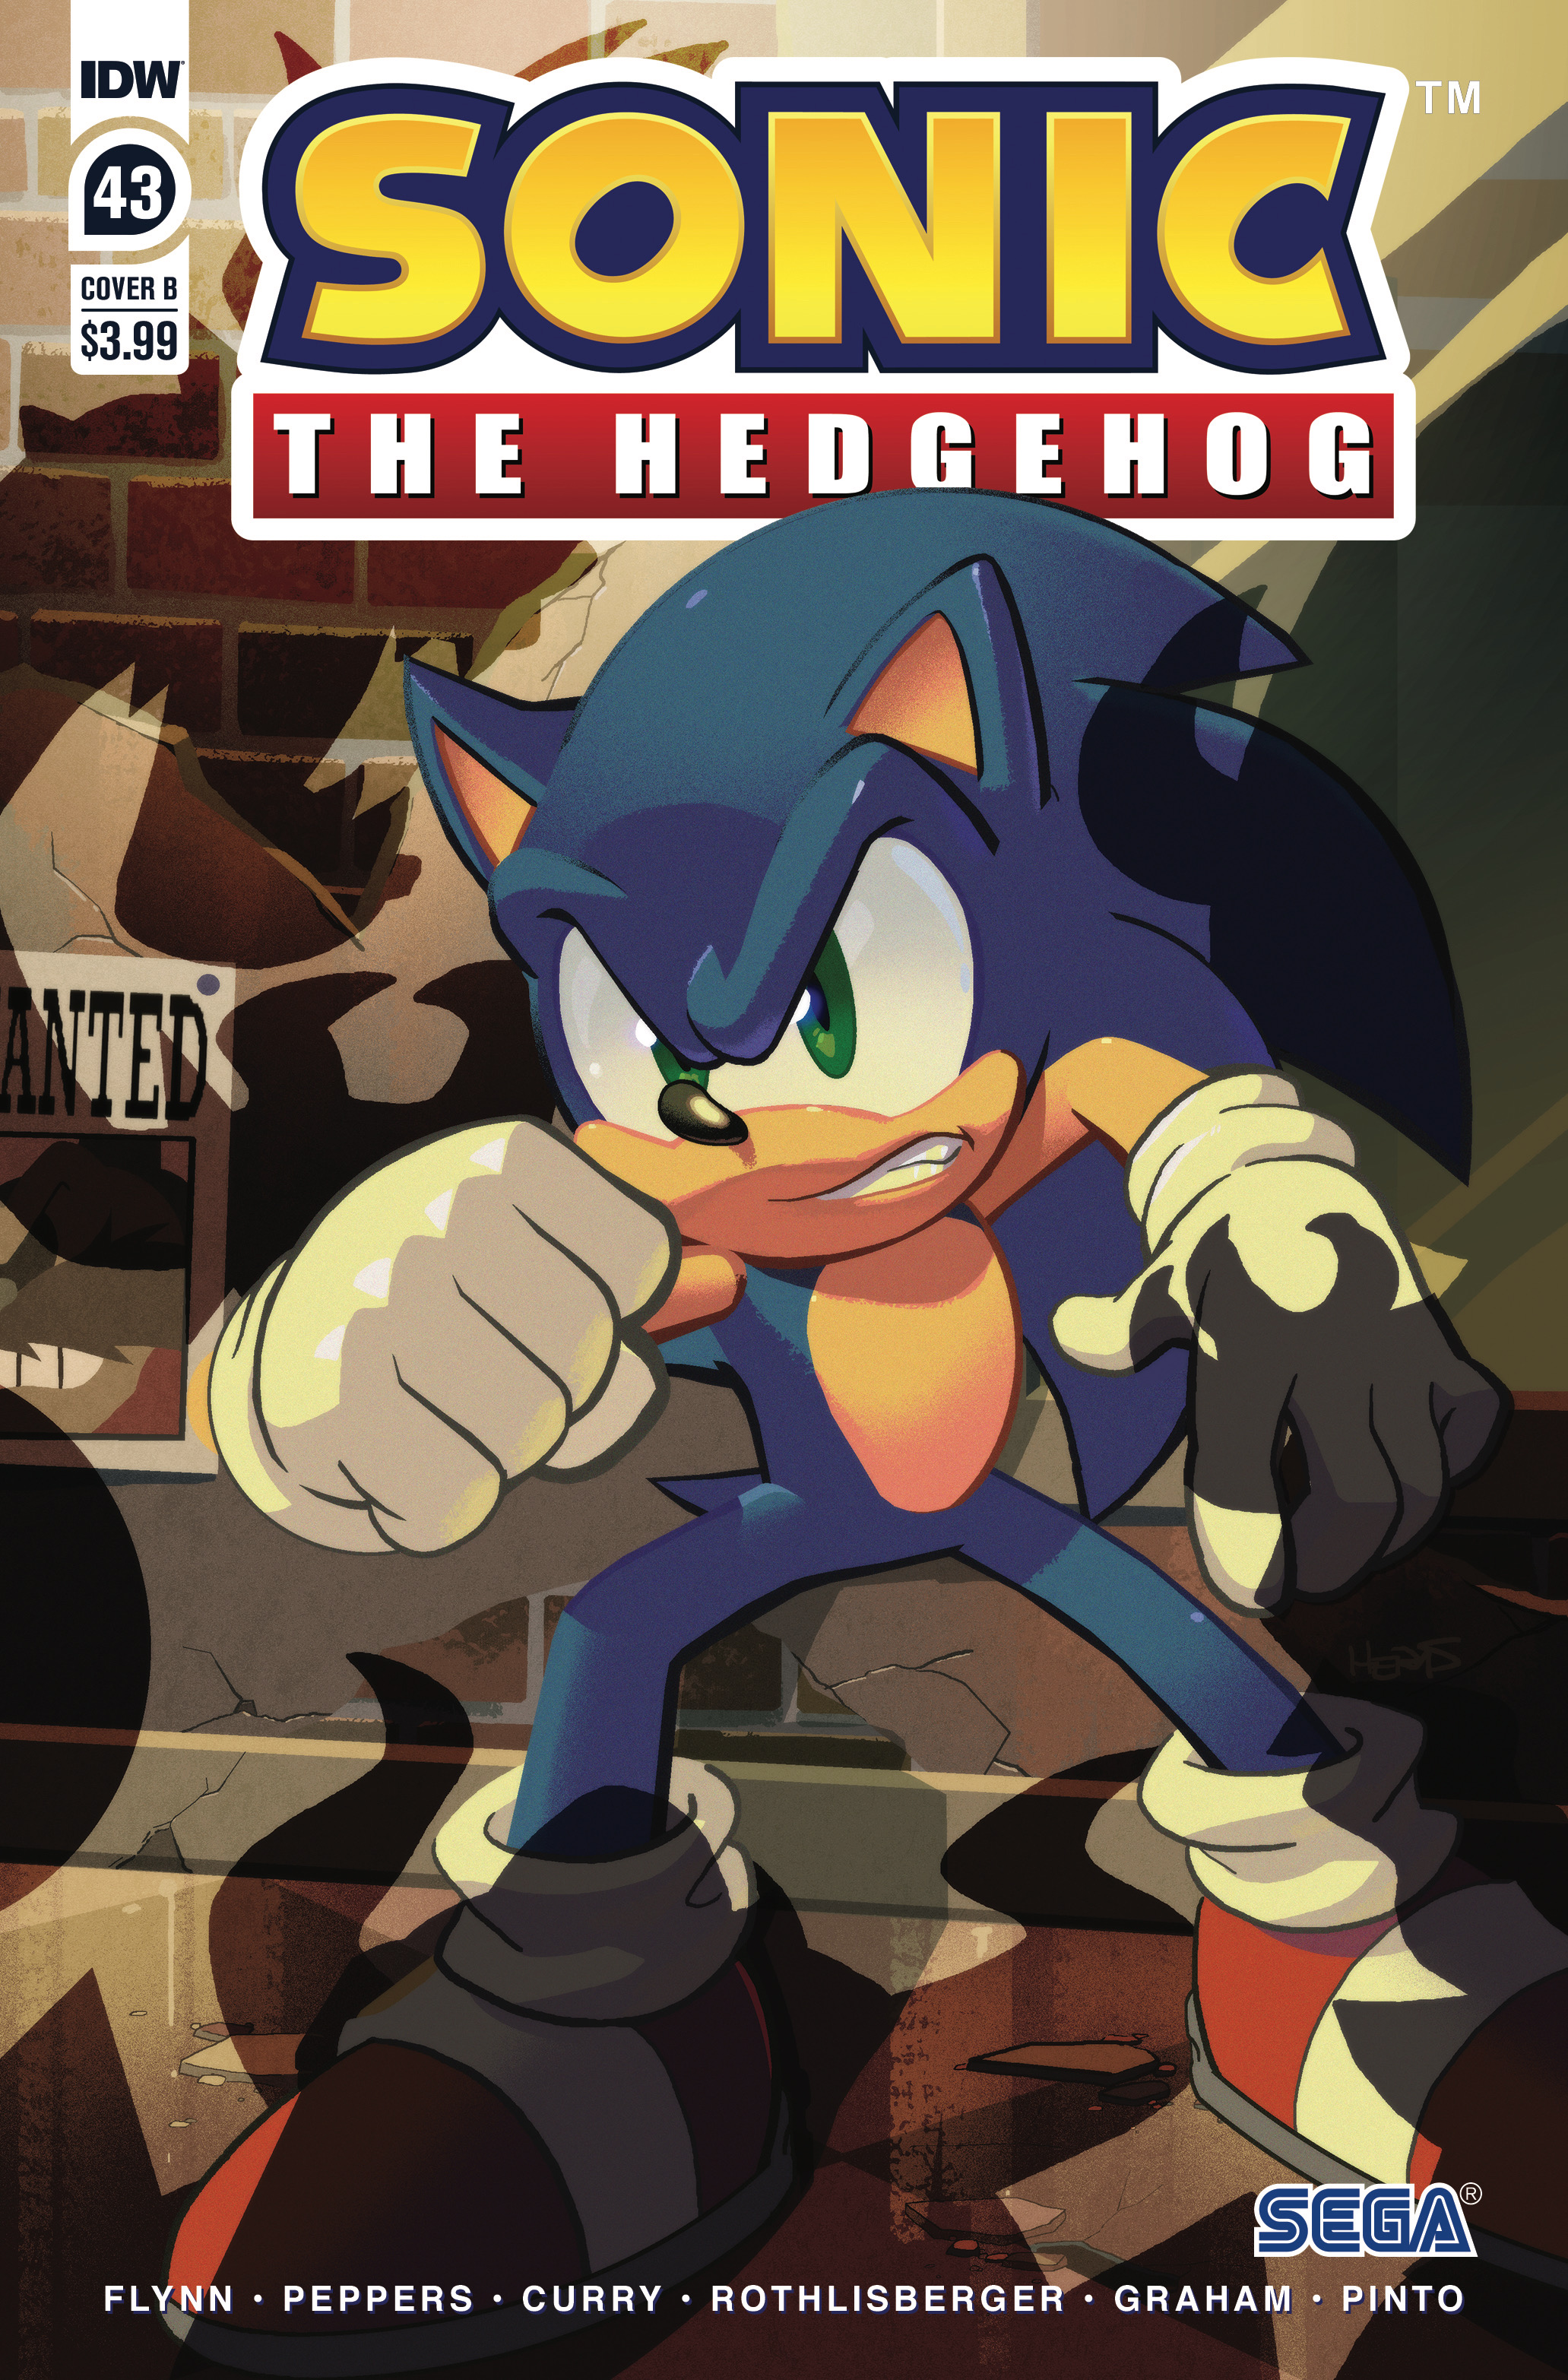 2018 New Bagged SONIC THE HEDGEHOG #4 Cover A 2nd Print 